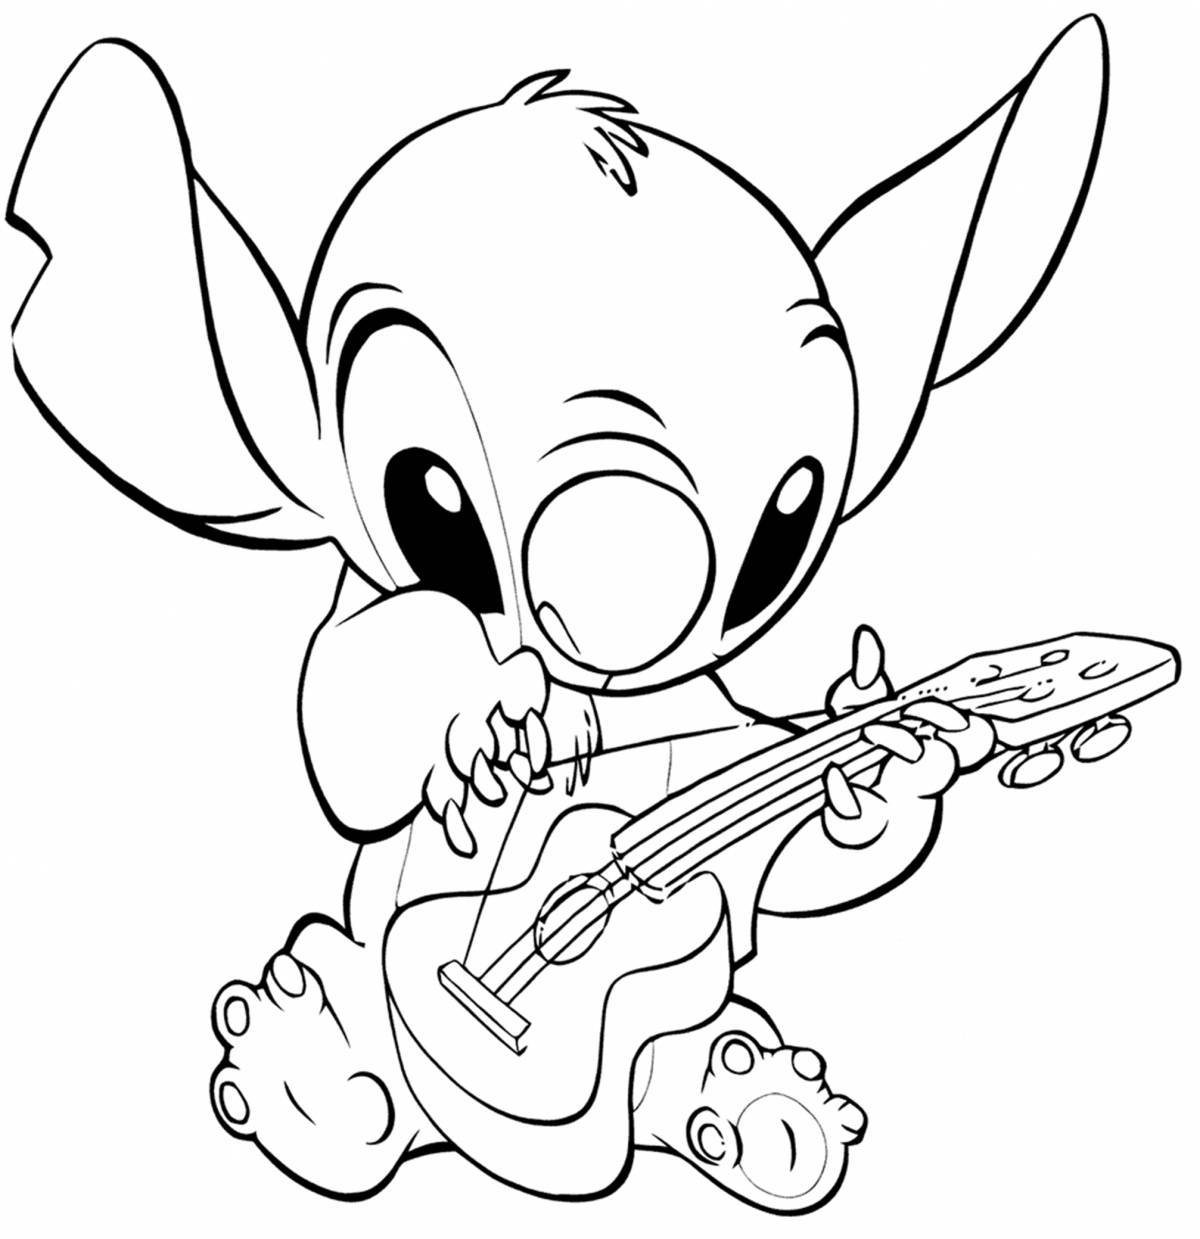 Colorful stitch coloring page